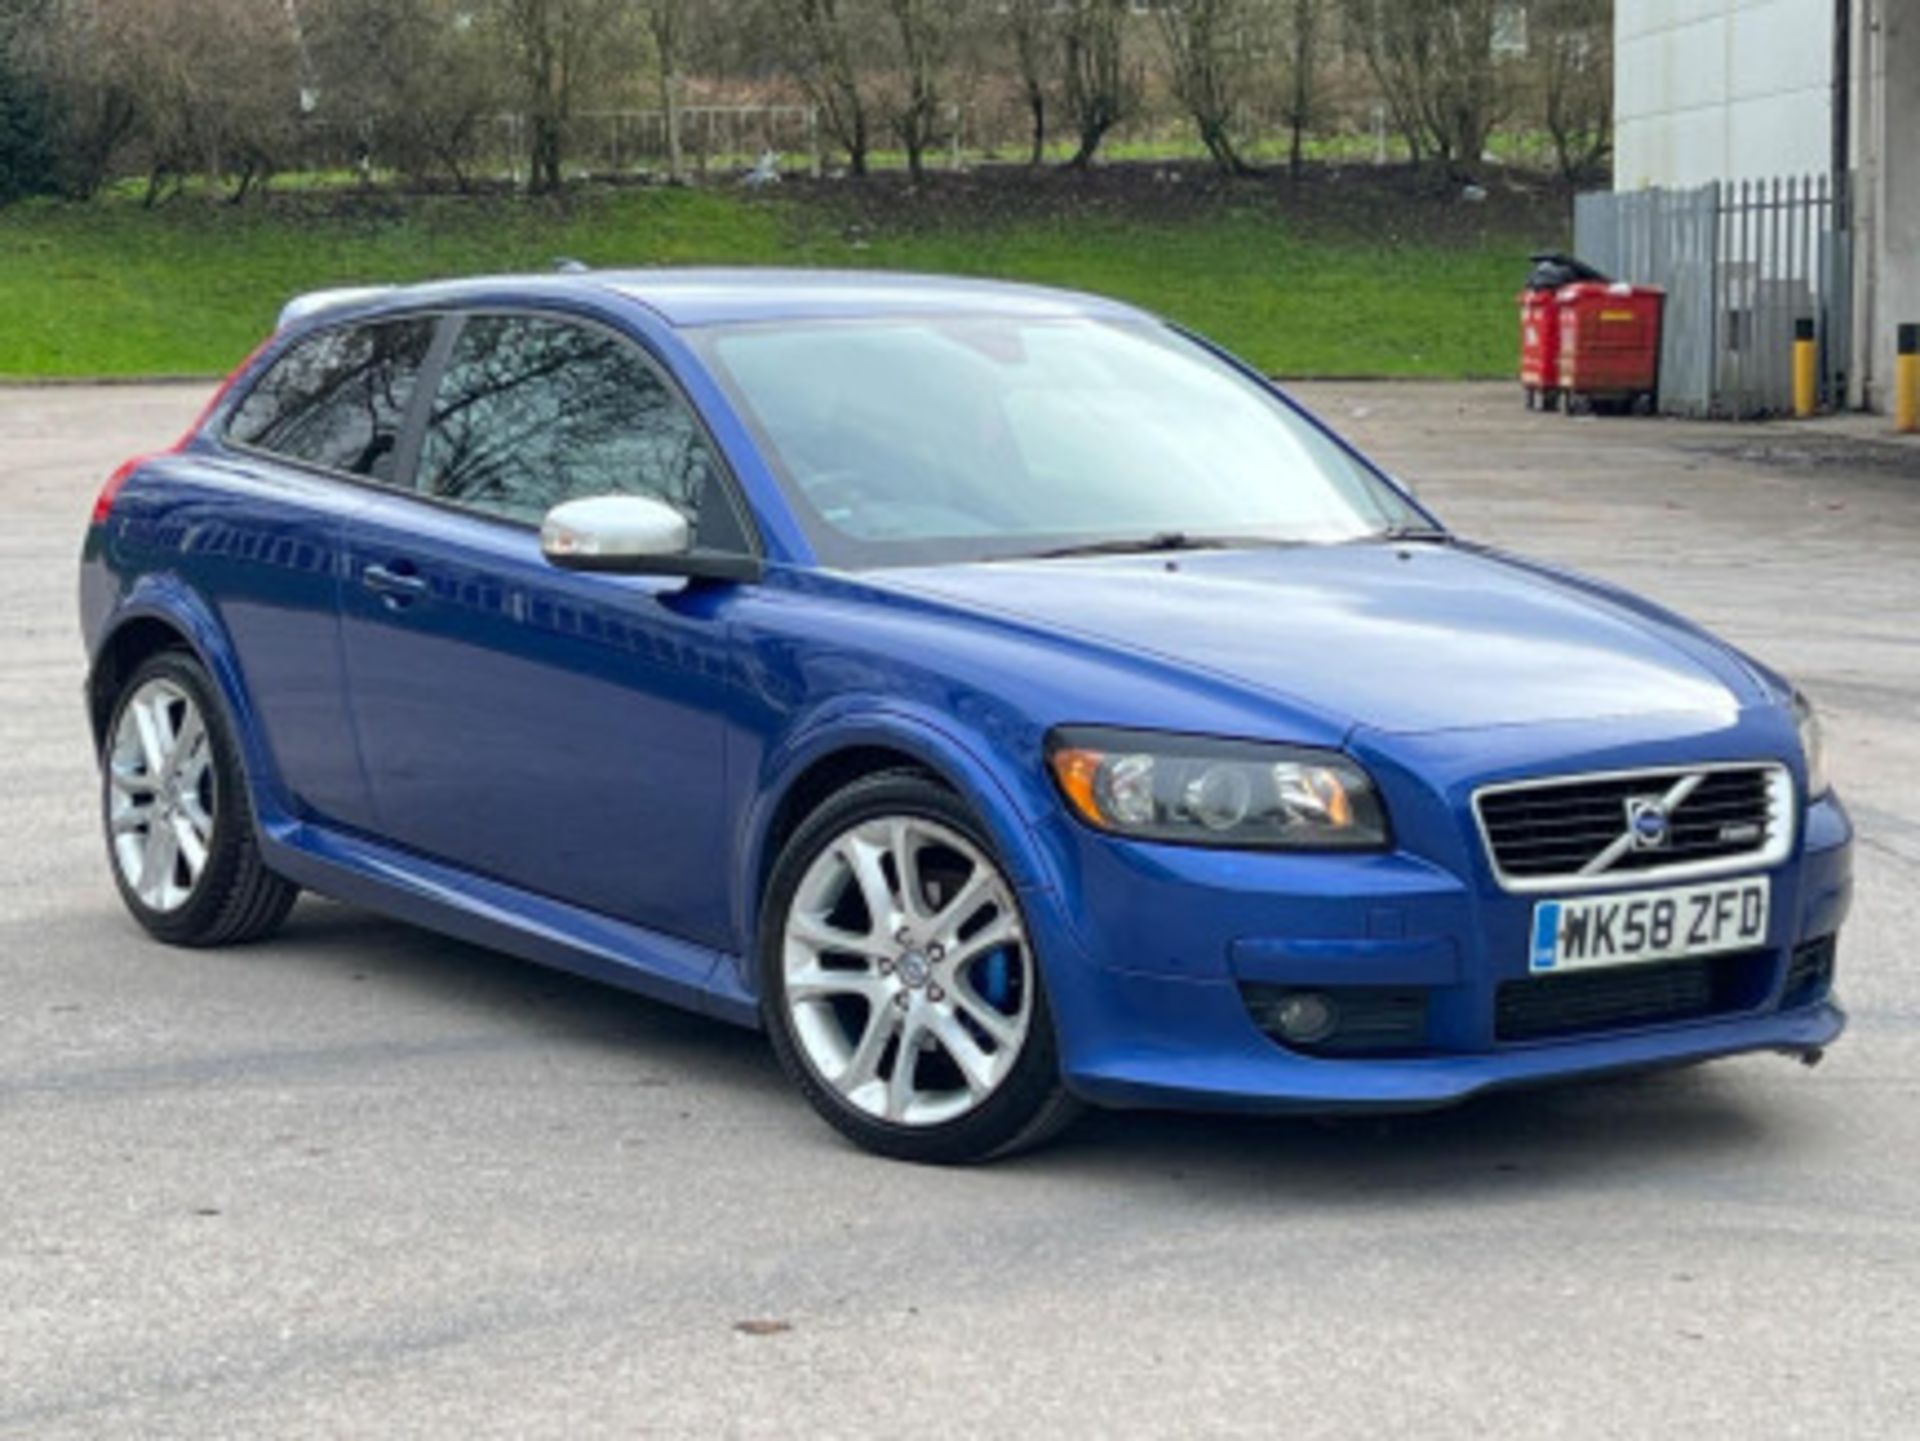 VOLVO C30 2.0D R-DESIGN SPORT 2DR - SPORTY AND LUXURIOUS COMPACT CAR >>--NO VAT ON HAMMER--<< - Image 43 of 103